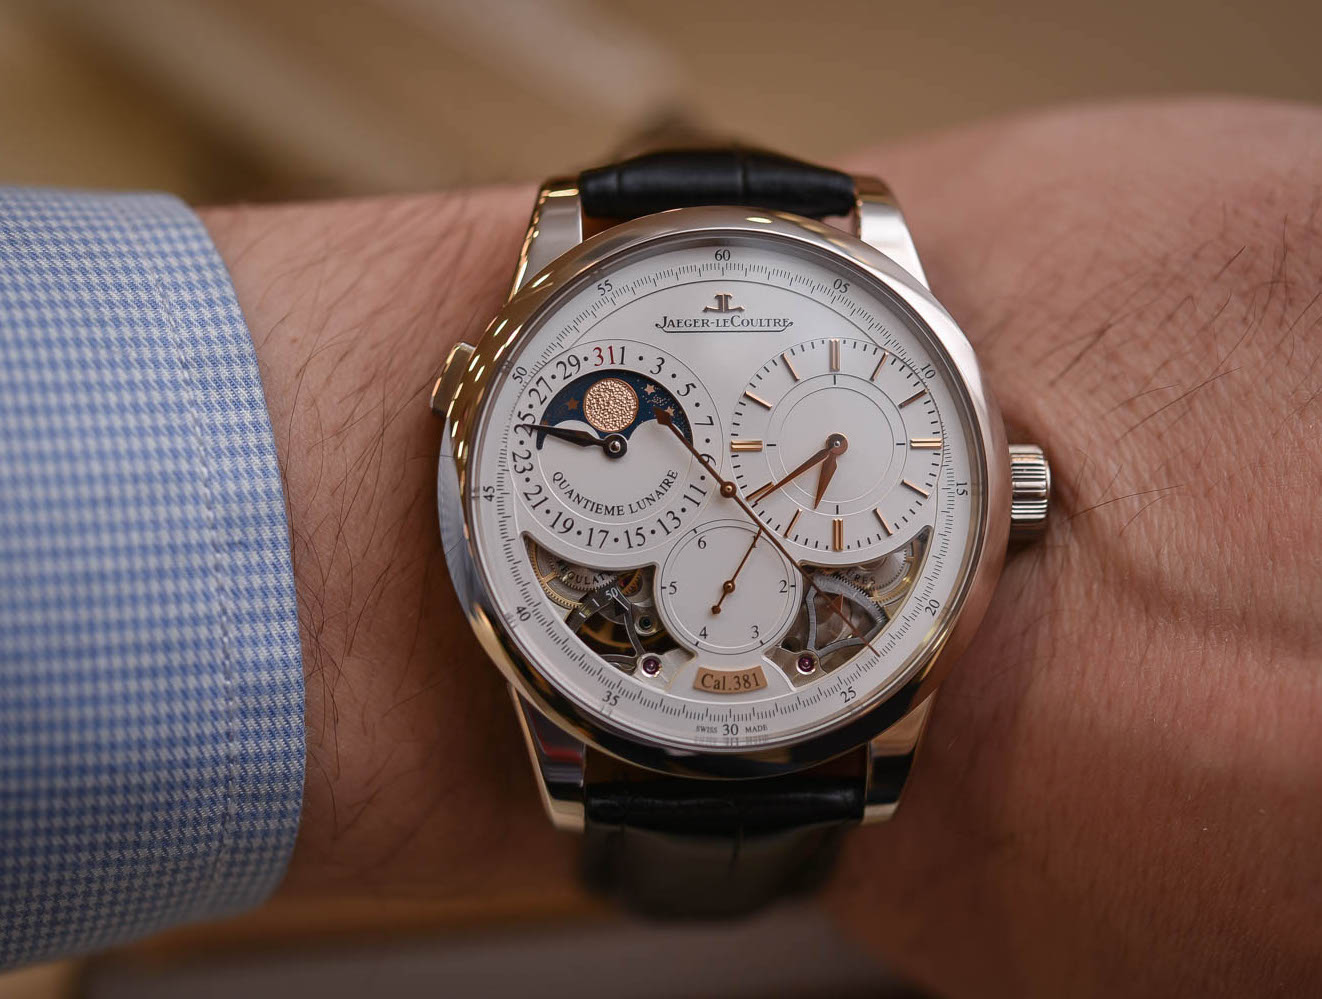 Jaeger-LeCoultre-Duometre-Quantieme-Lunaire-in-white-gold-and-opened-dial-6.jpeg